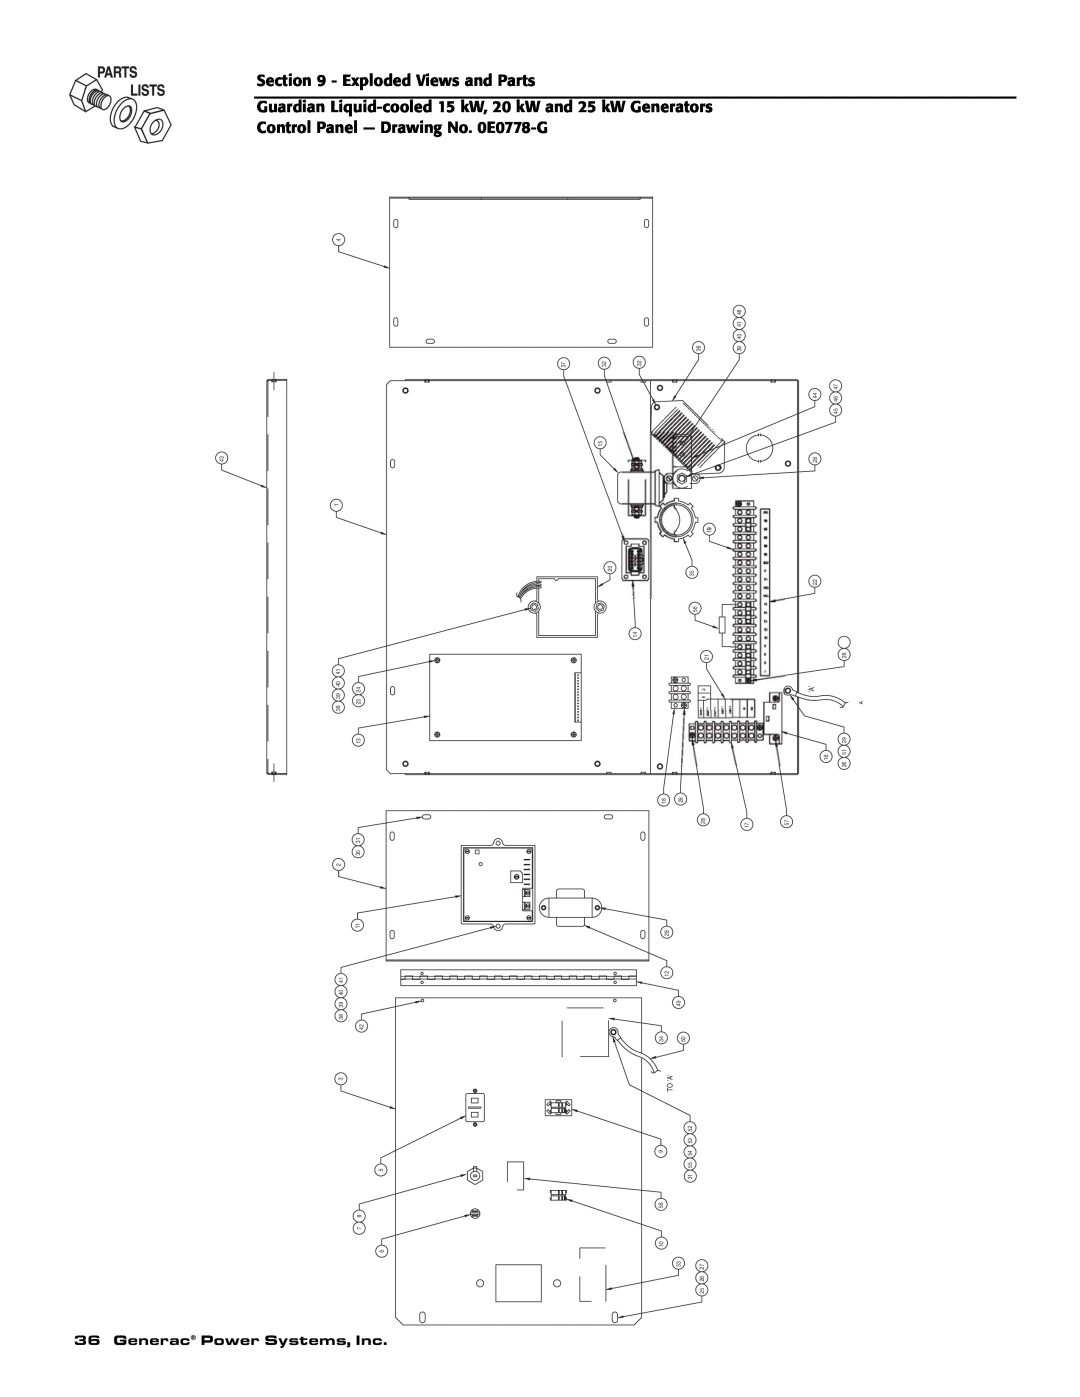 Guardian Technologies 004726-0, 004725-3, 004723-0 Exploded Views and Parts, Generac Power Systems, Inc, 38 39 40 